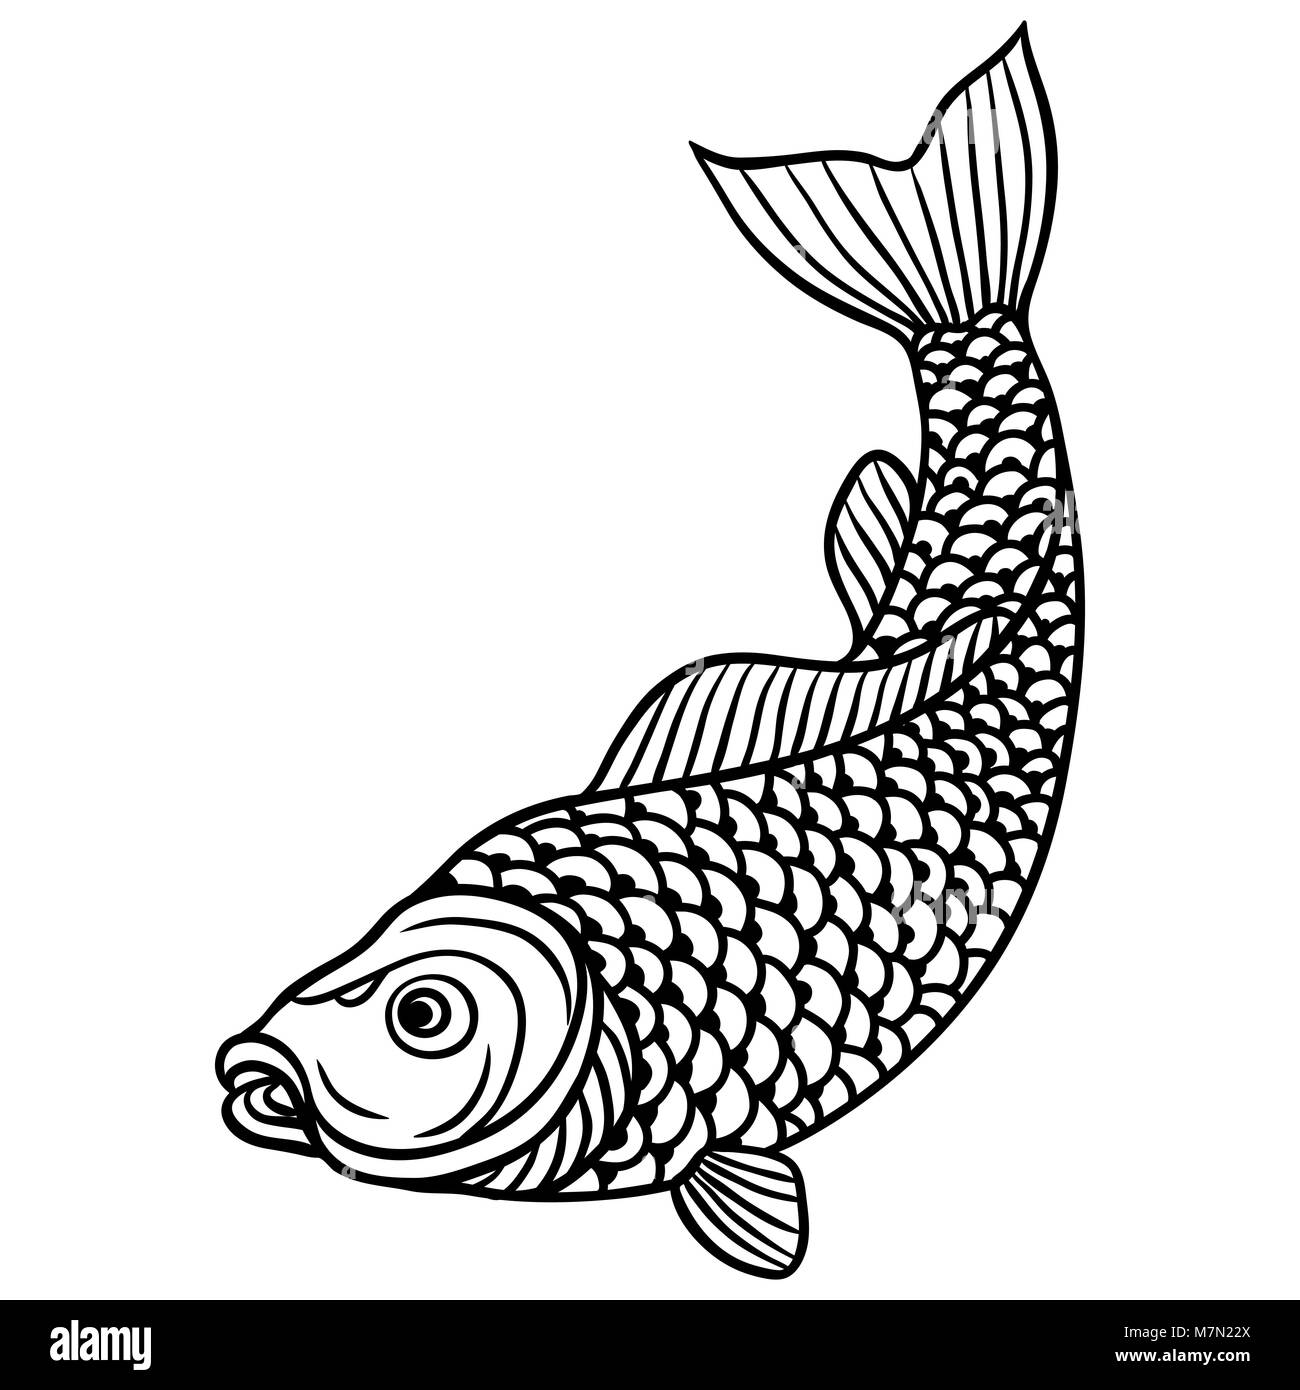 Fish vintage drawing Black and White Stock Photos & Images - Page 3 - Alamy